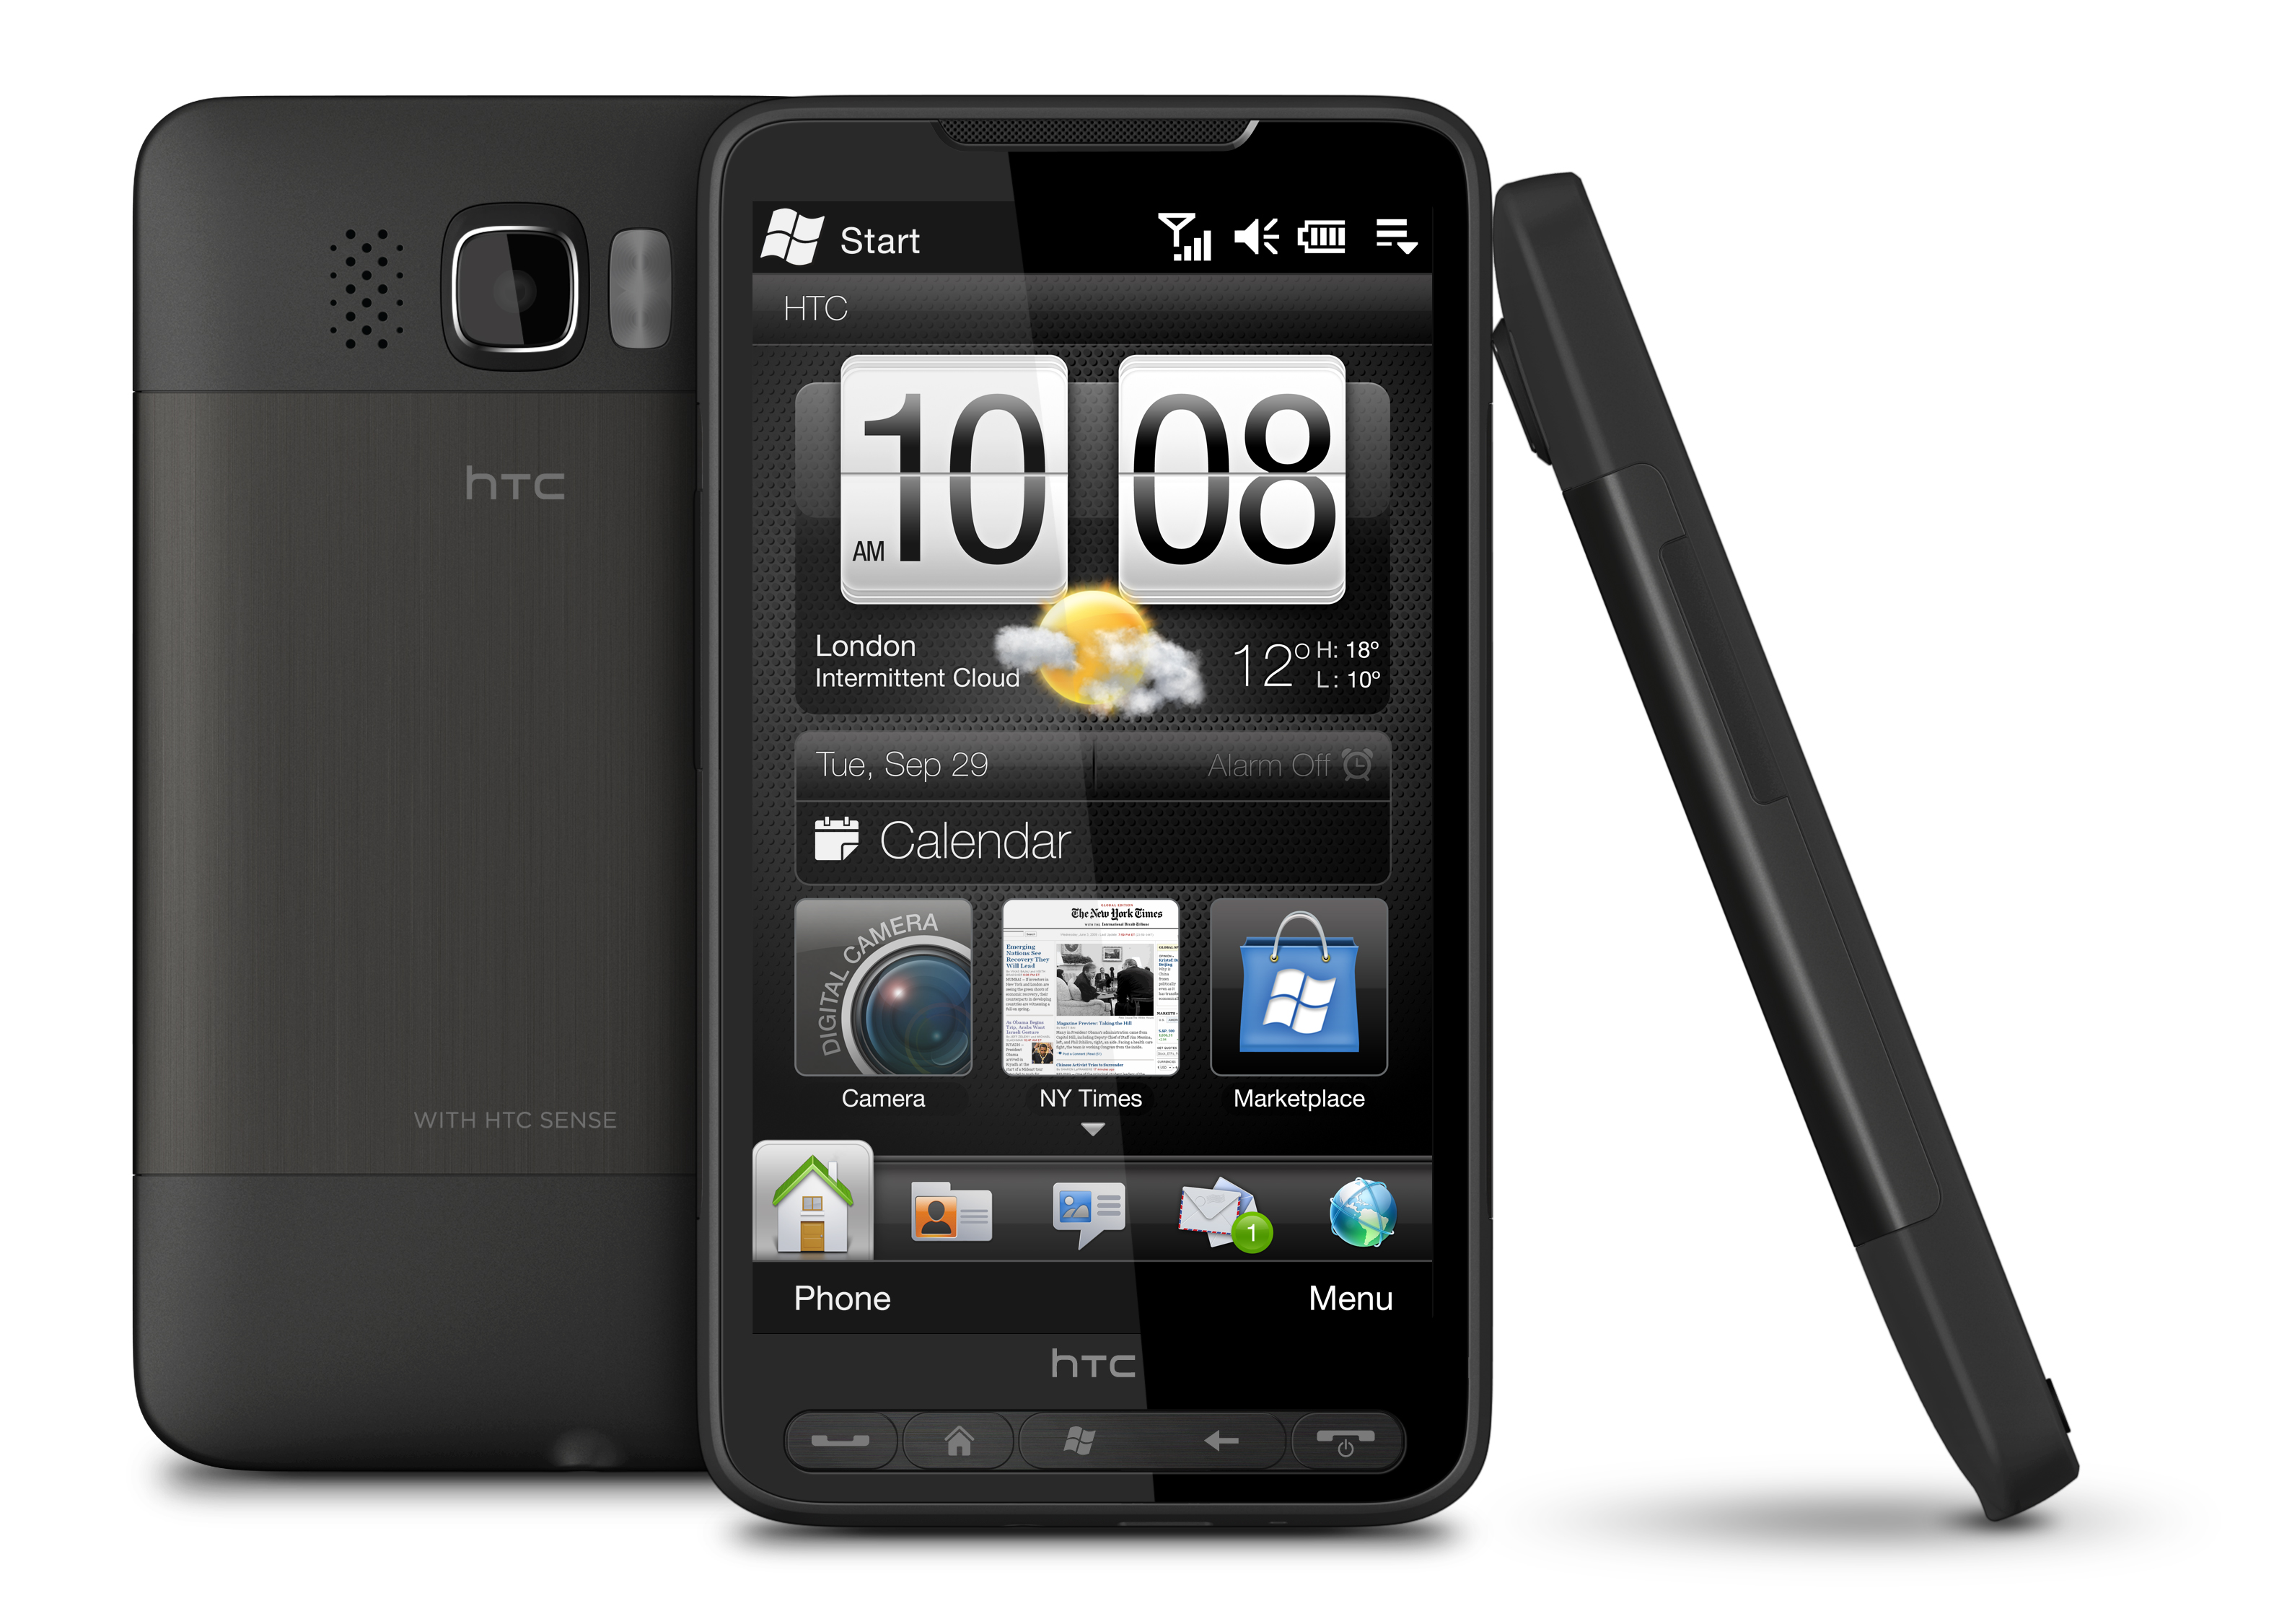 htc-hd2-proves-again-that-age-is-just-a-number-receives-its-first